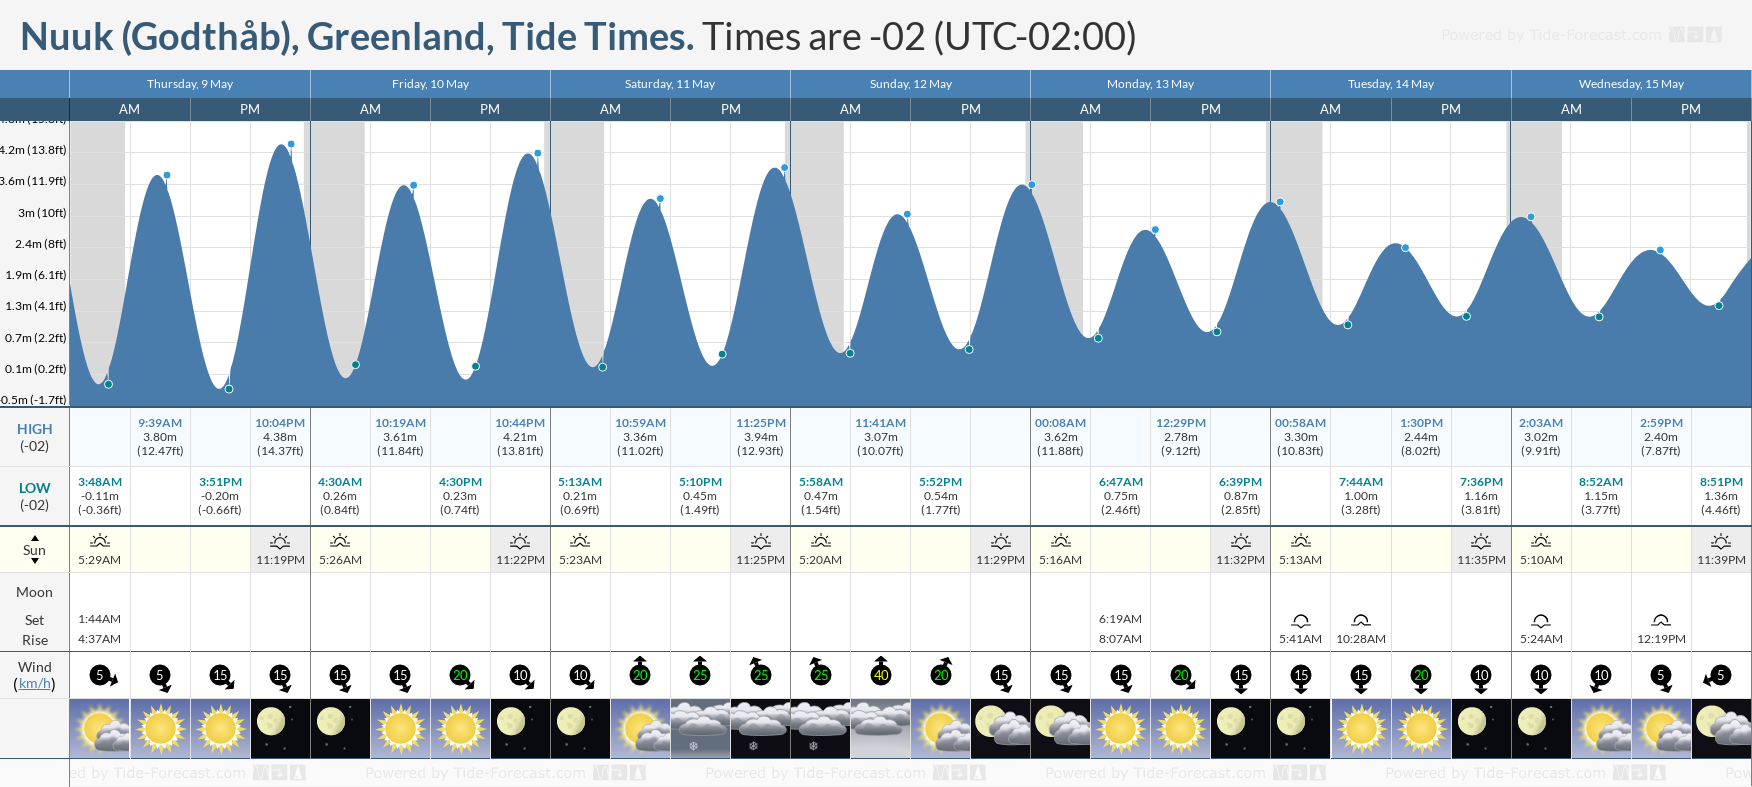 Nuuk (Godthåb), Greenland Tide Chart including high and low tide tide times for the next 7 days